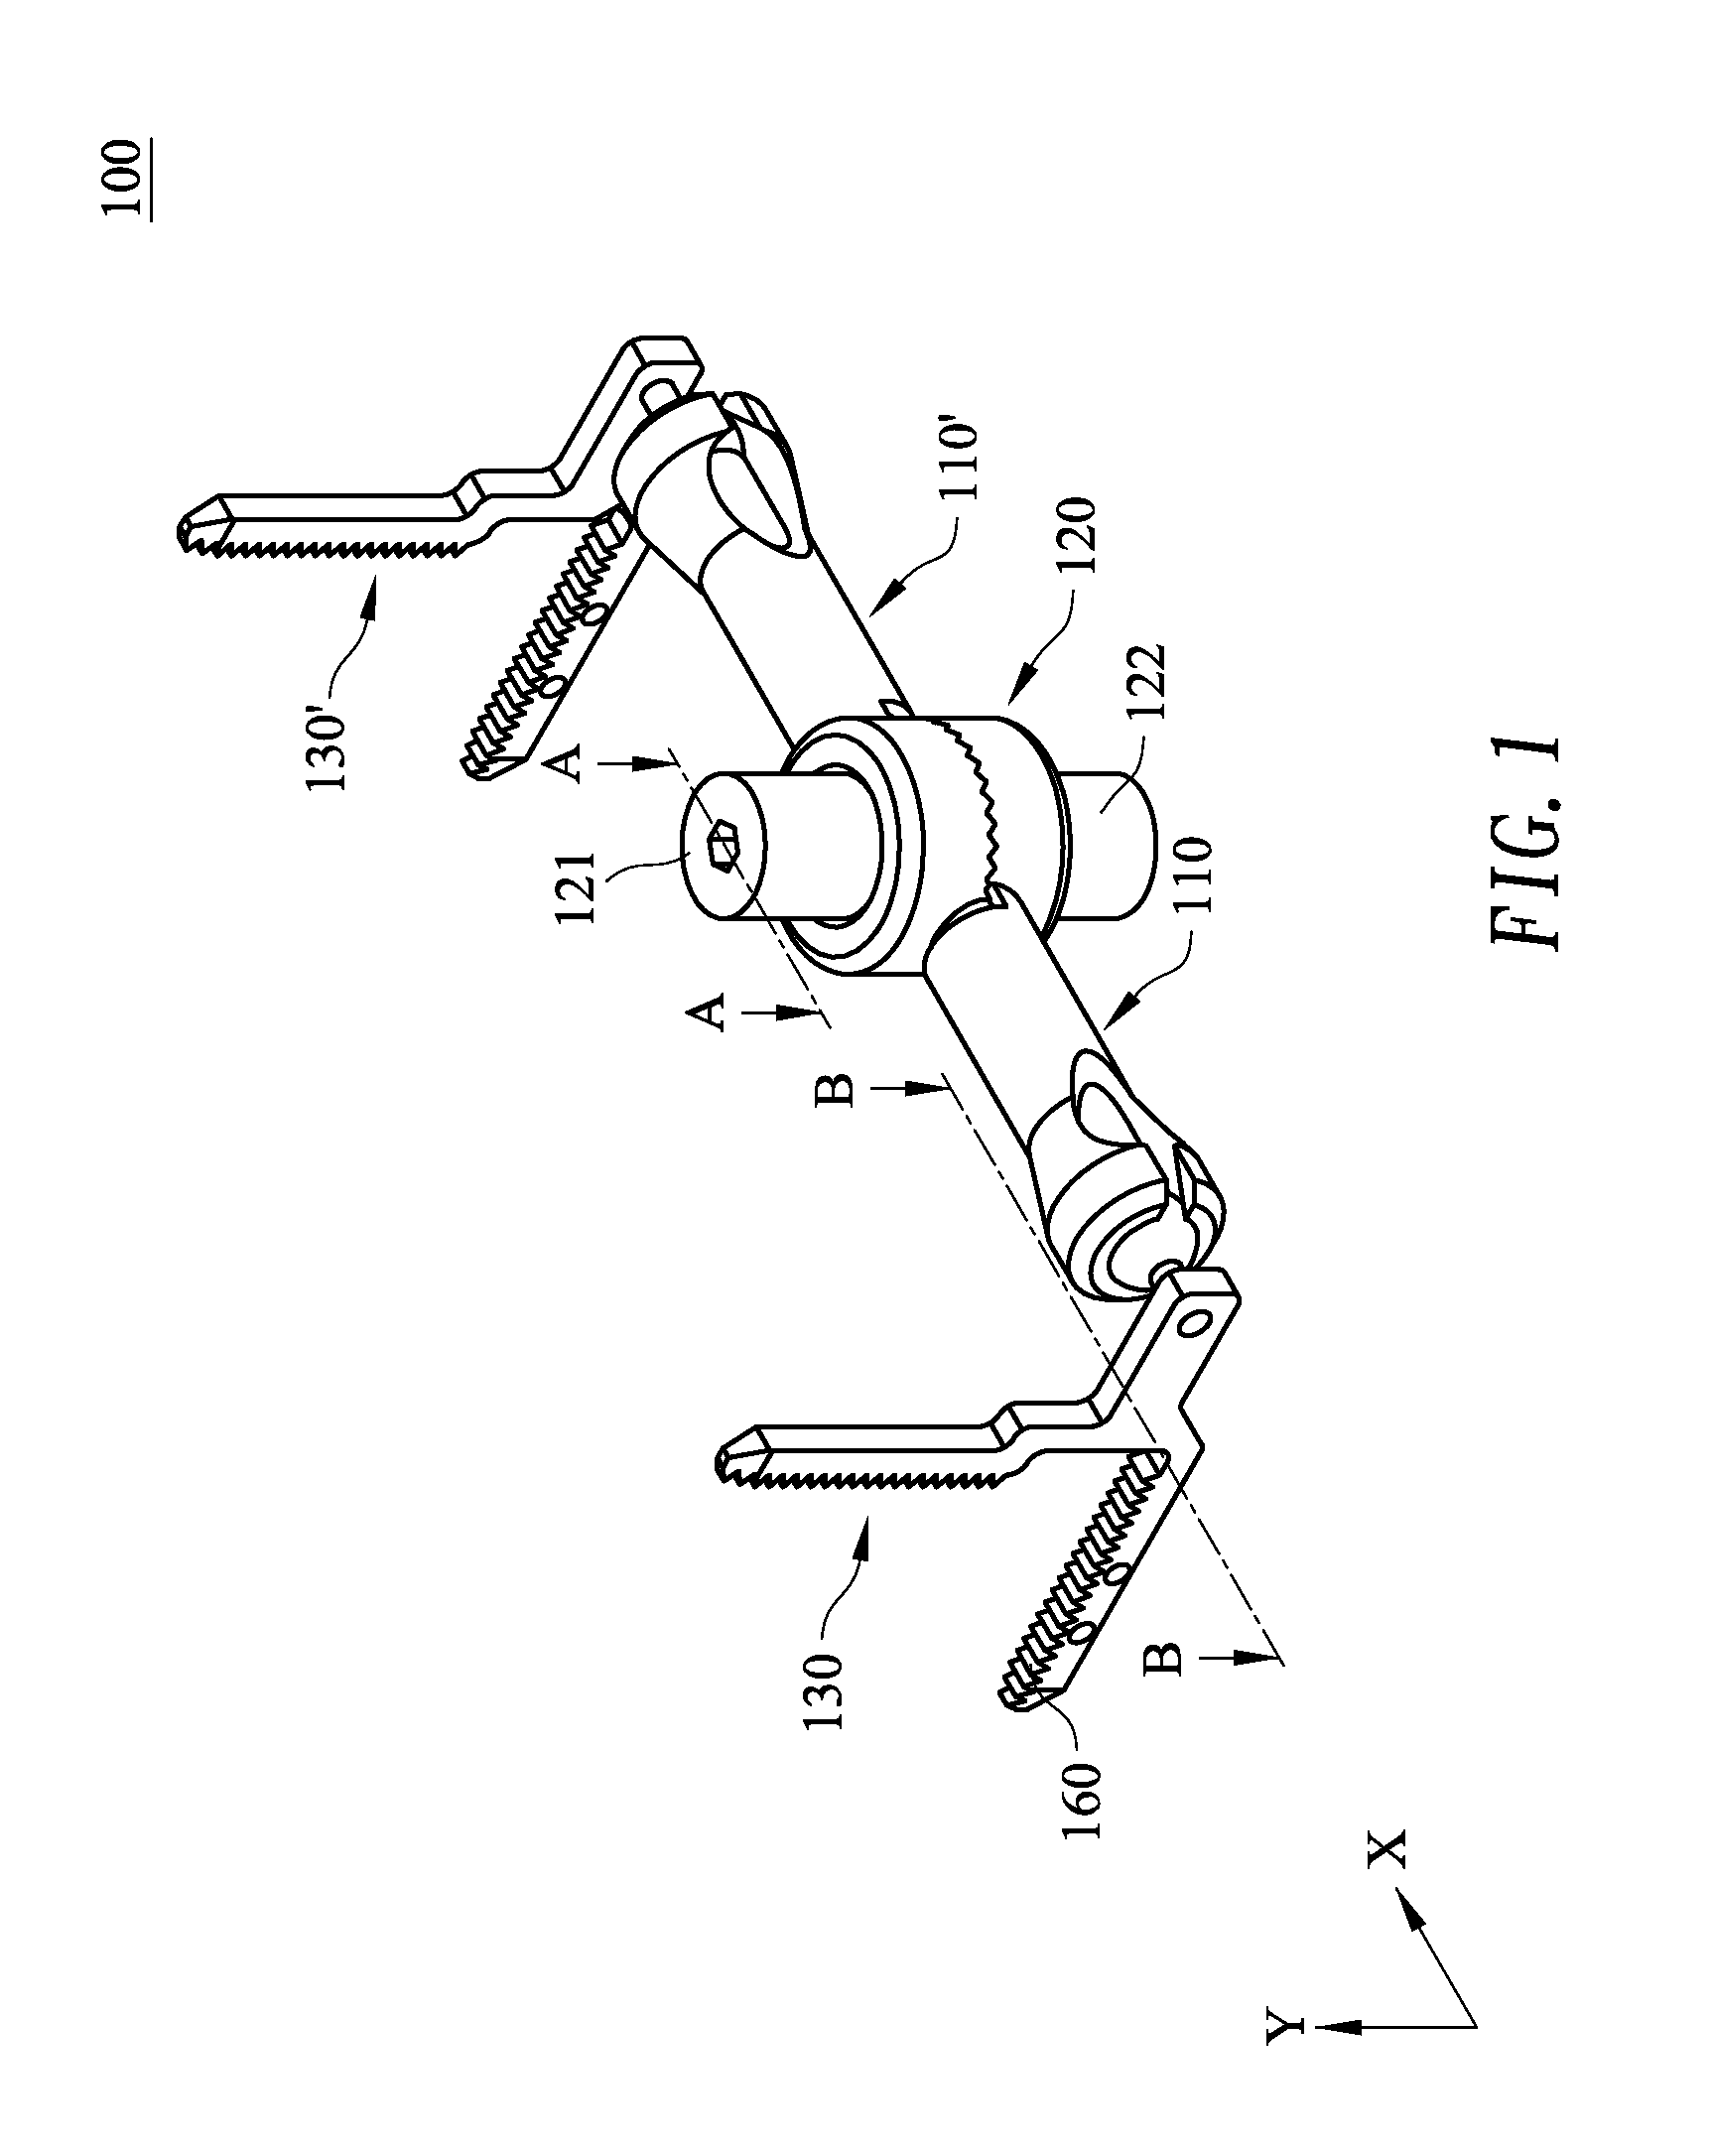 Measuring and guiding device for reconstruction surgery